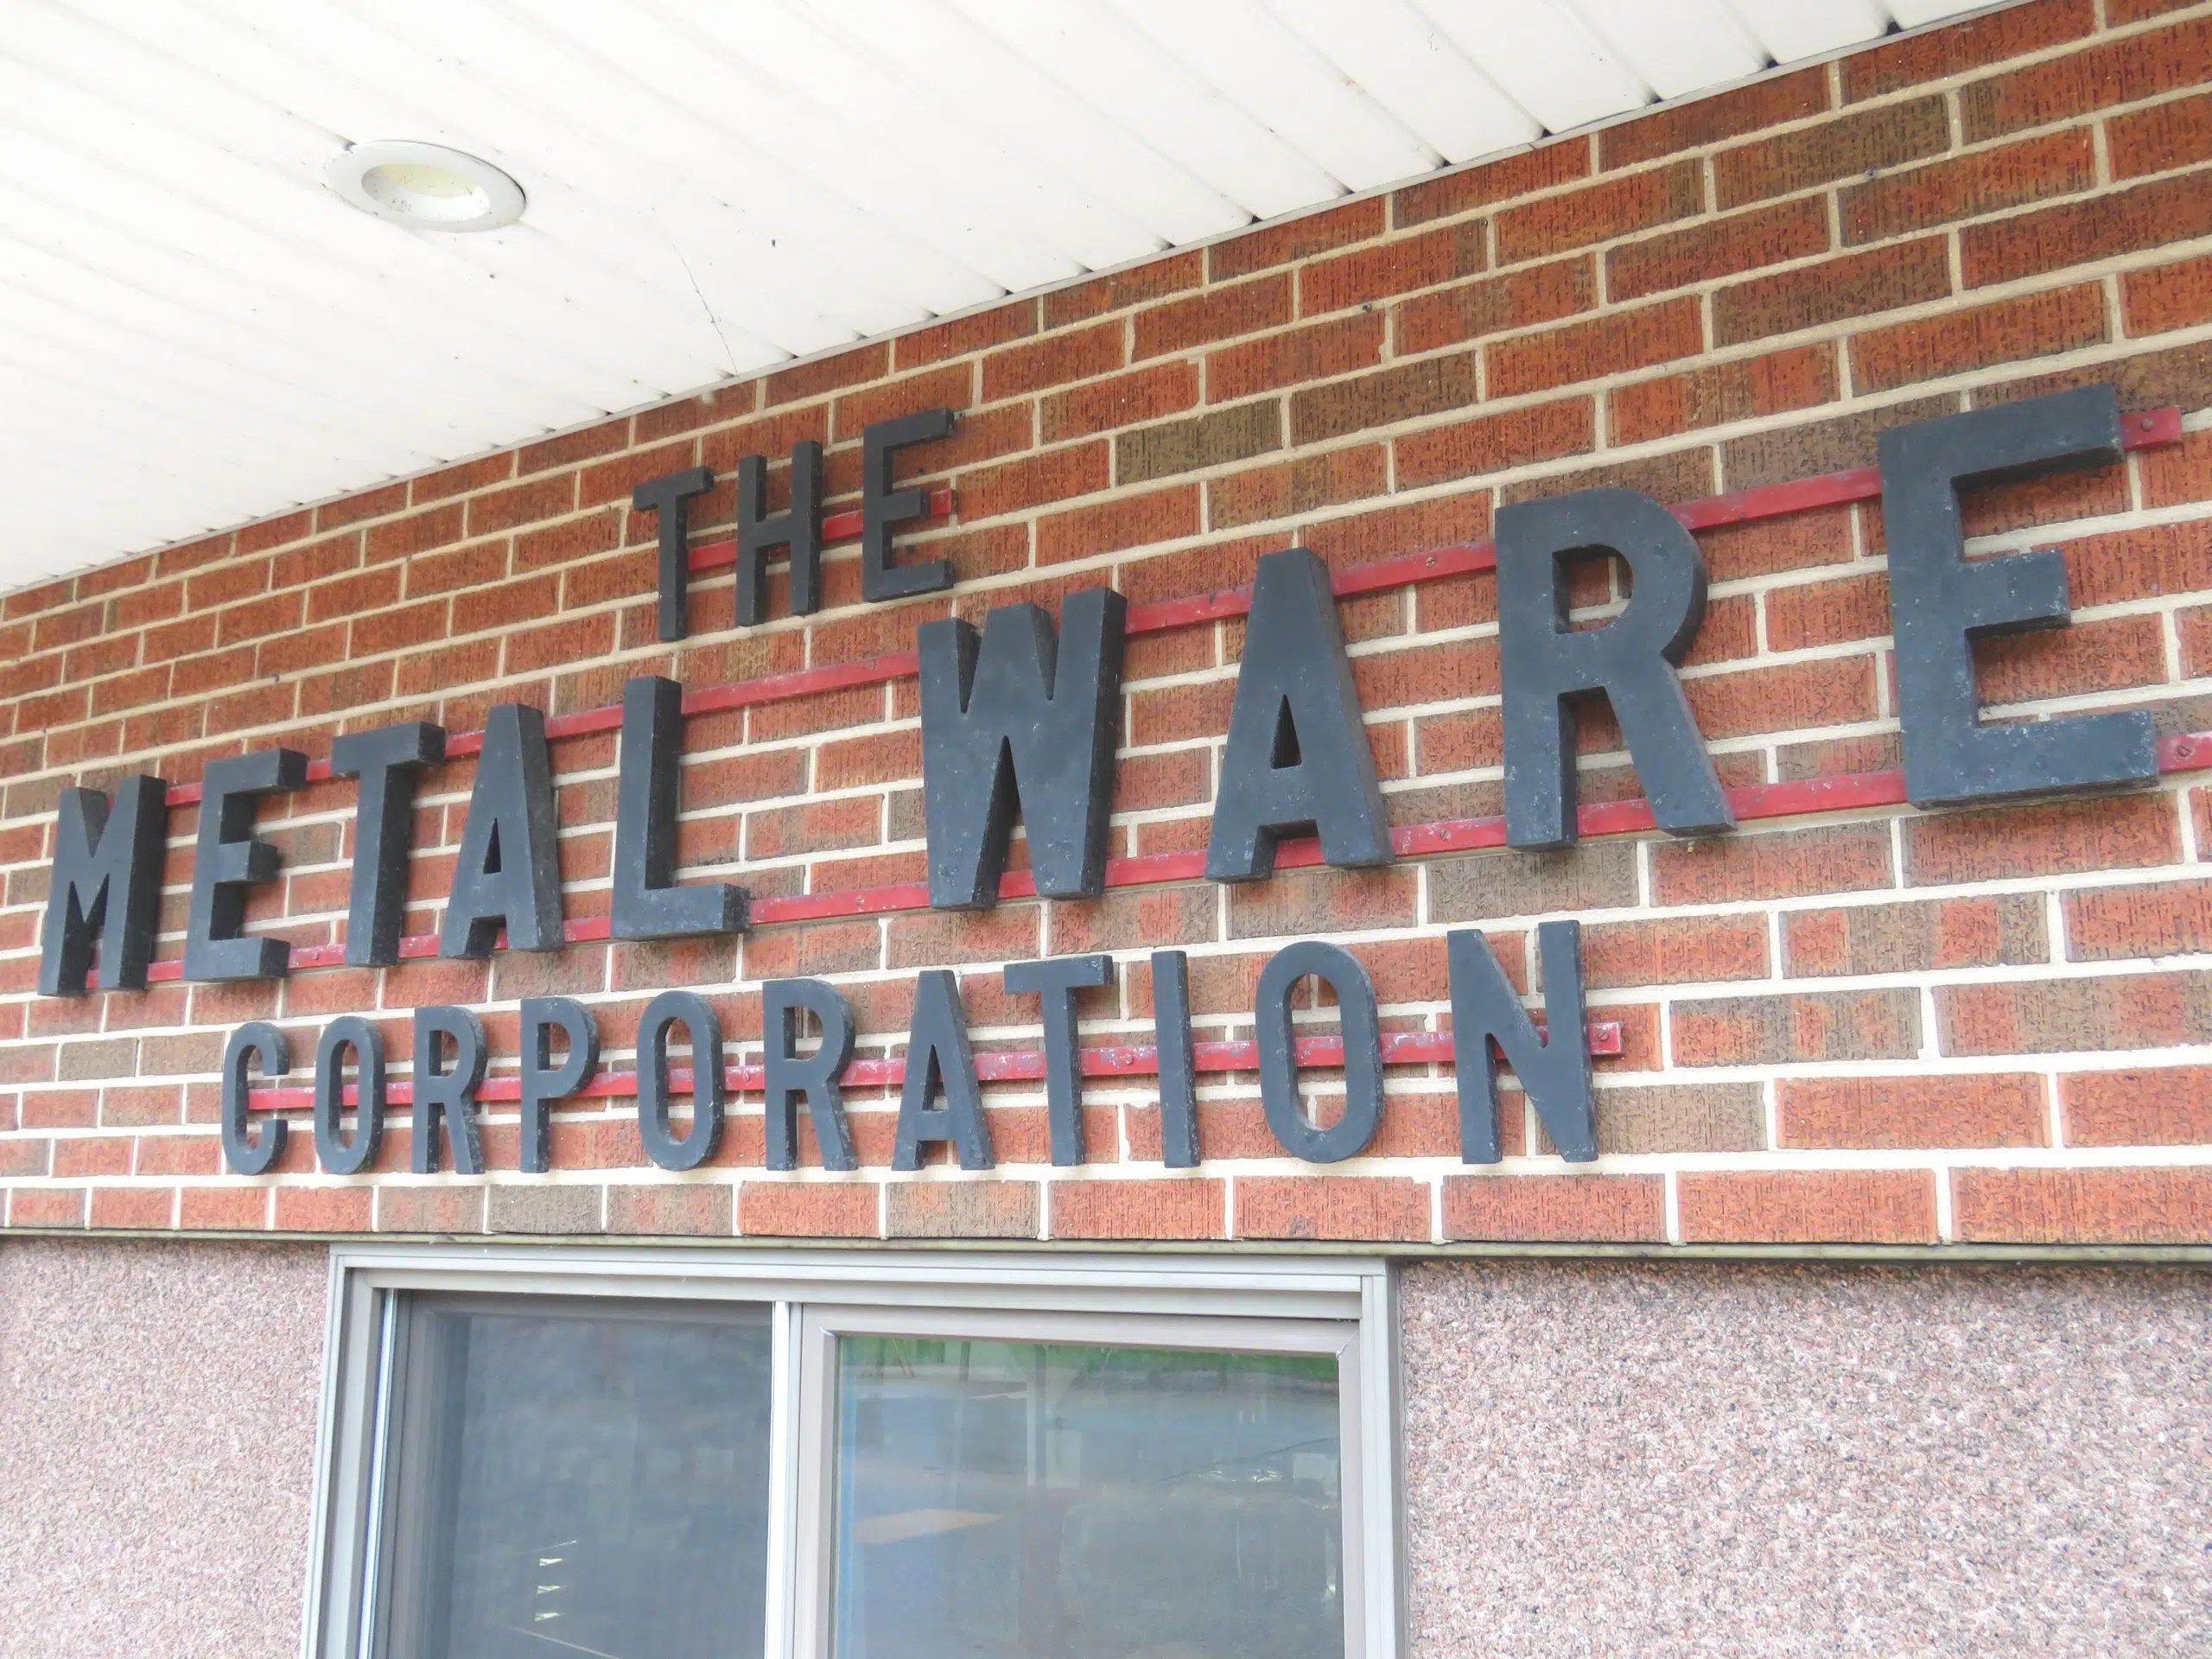 Metal Ware Celebrates 100 Years in Business by Looking to Expand